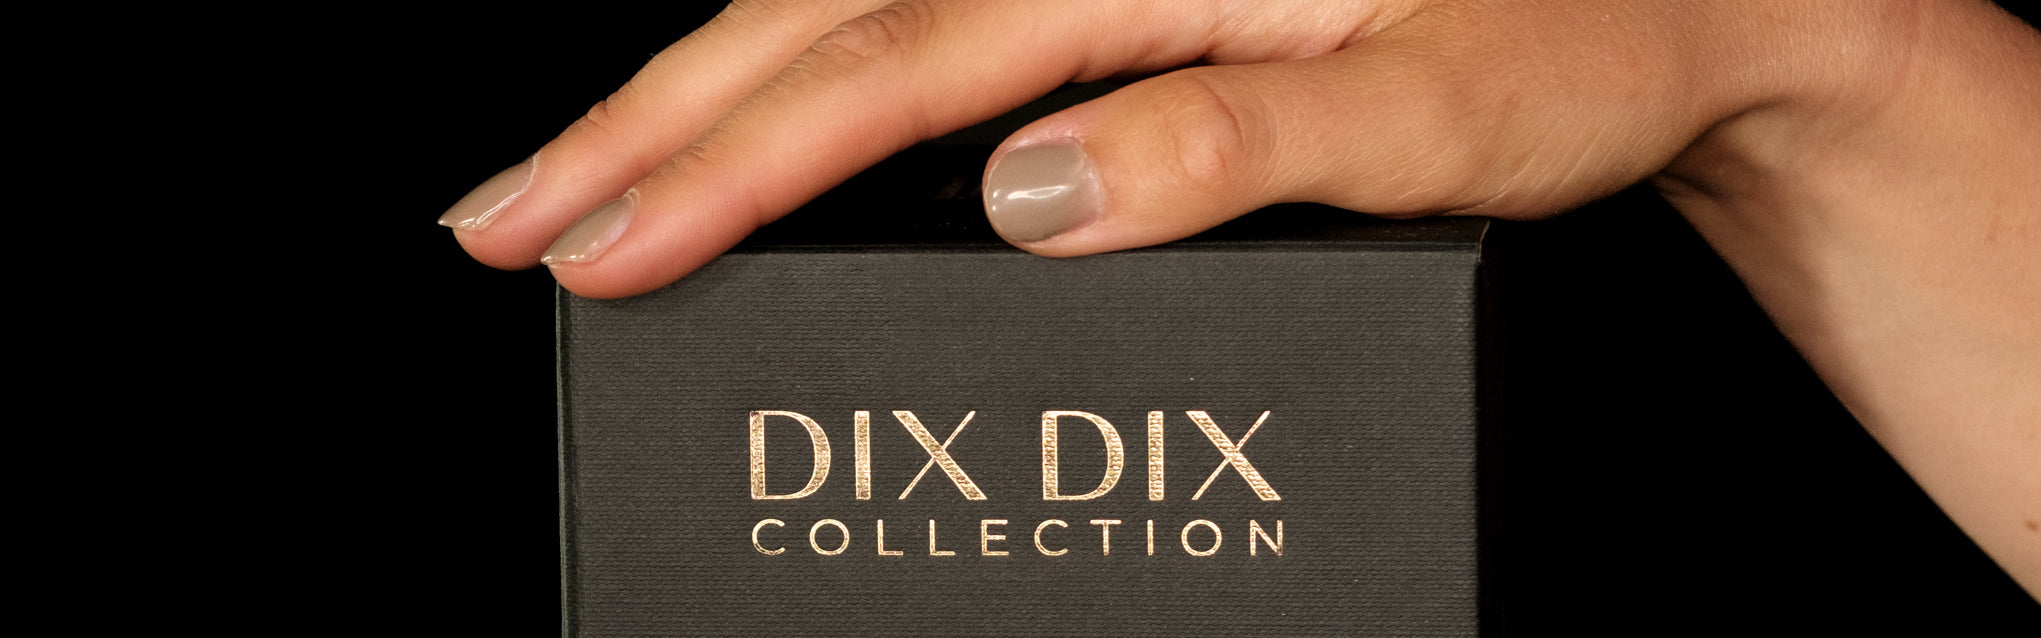 Our luxury packaging which is 100% recyclable - DIX DIX collection